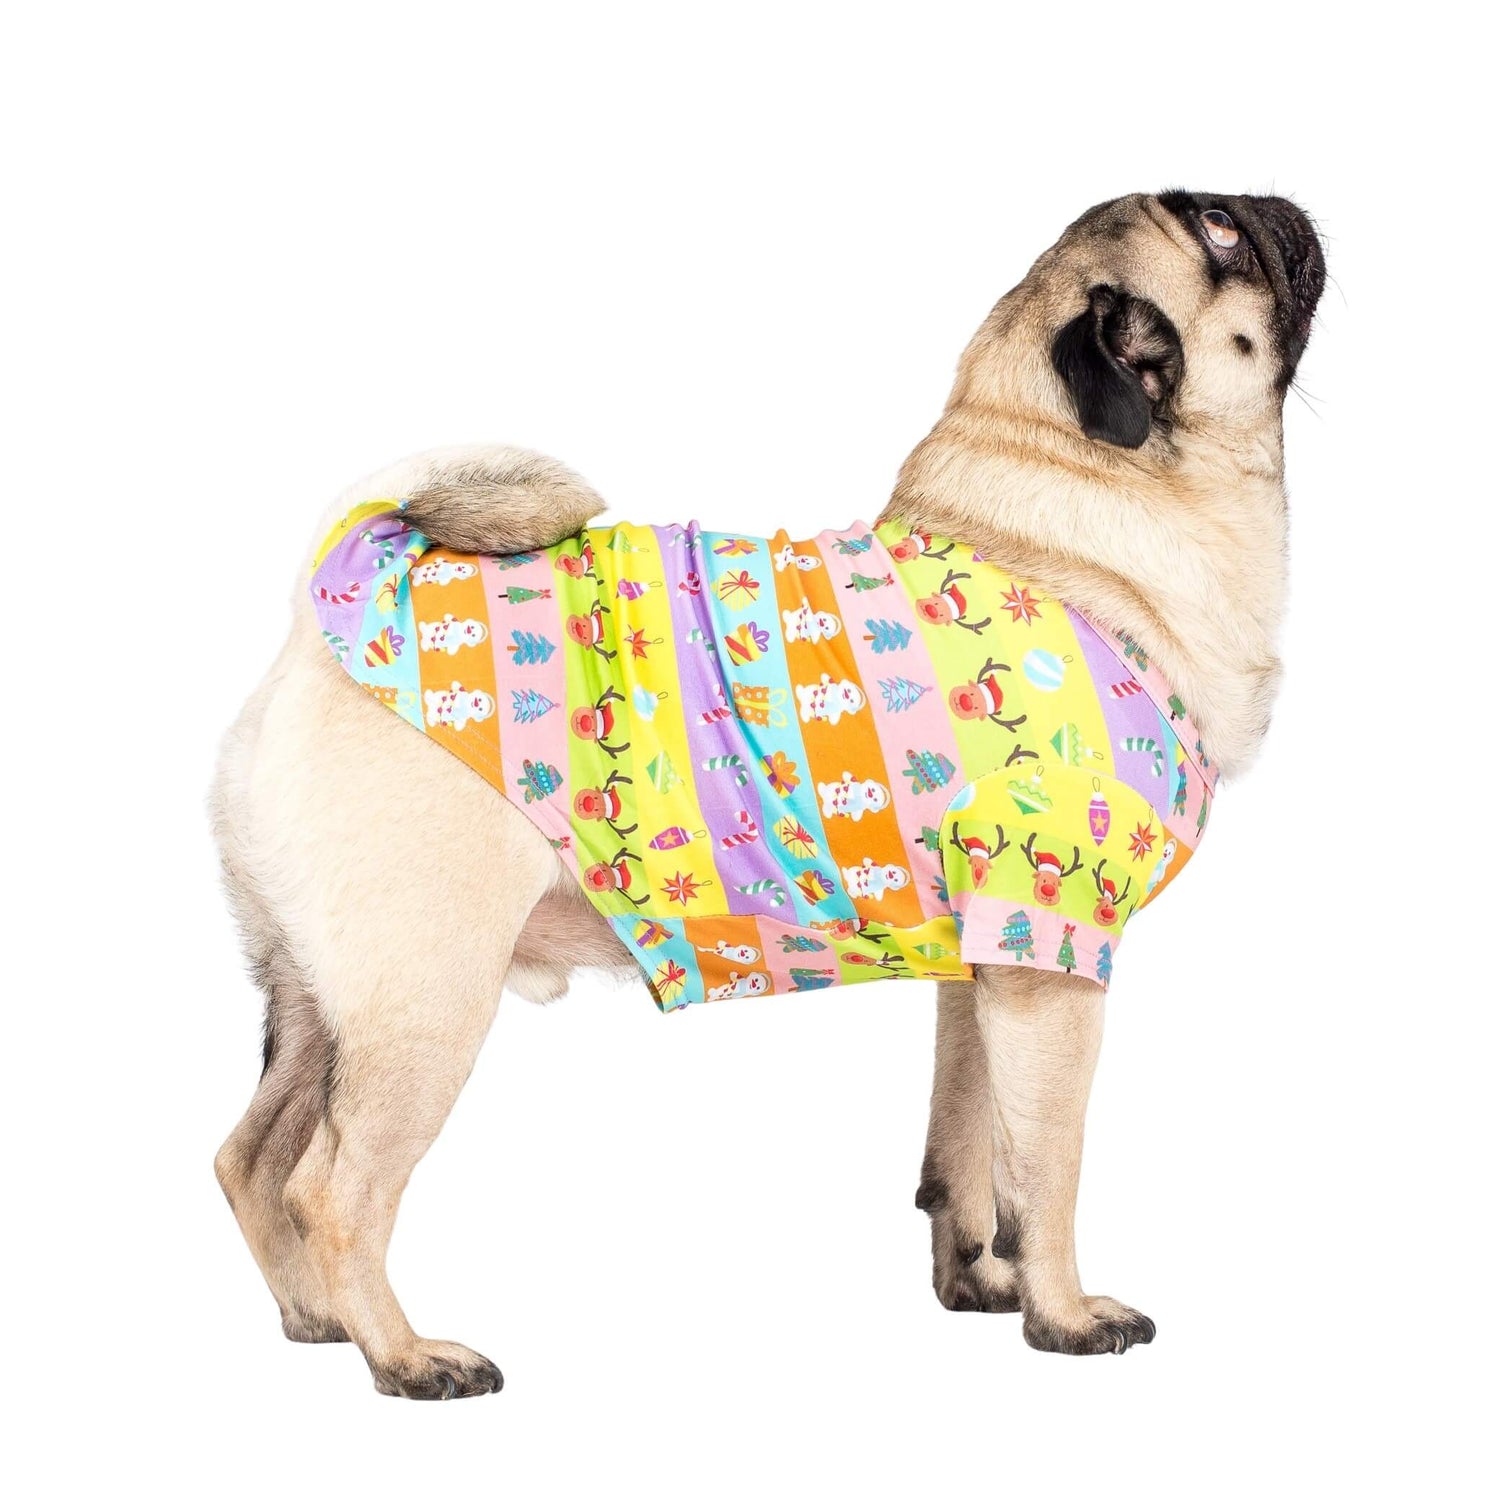 A pug wearing VIbrant Hound's Electric Energy shirt for dogs. It is green, orange, pink, and purple stripes with reindeer, christmas trees, snowmen and christmas decorations printed on it.